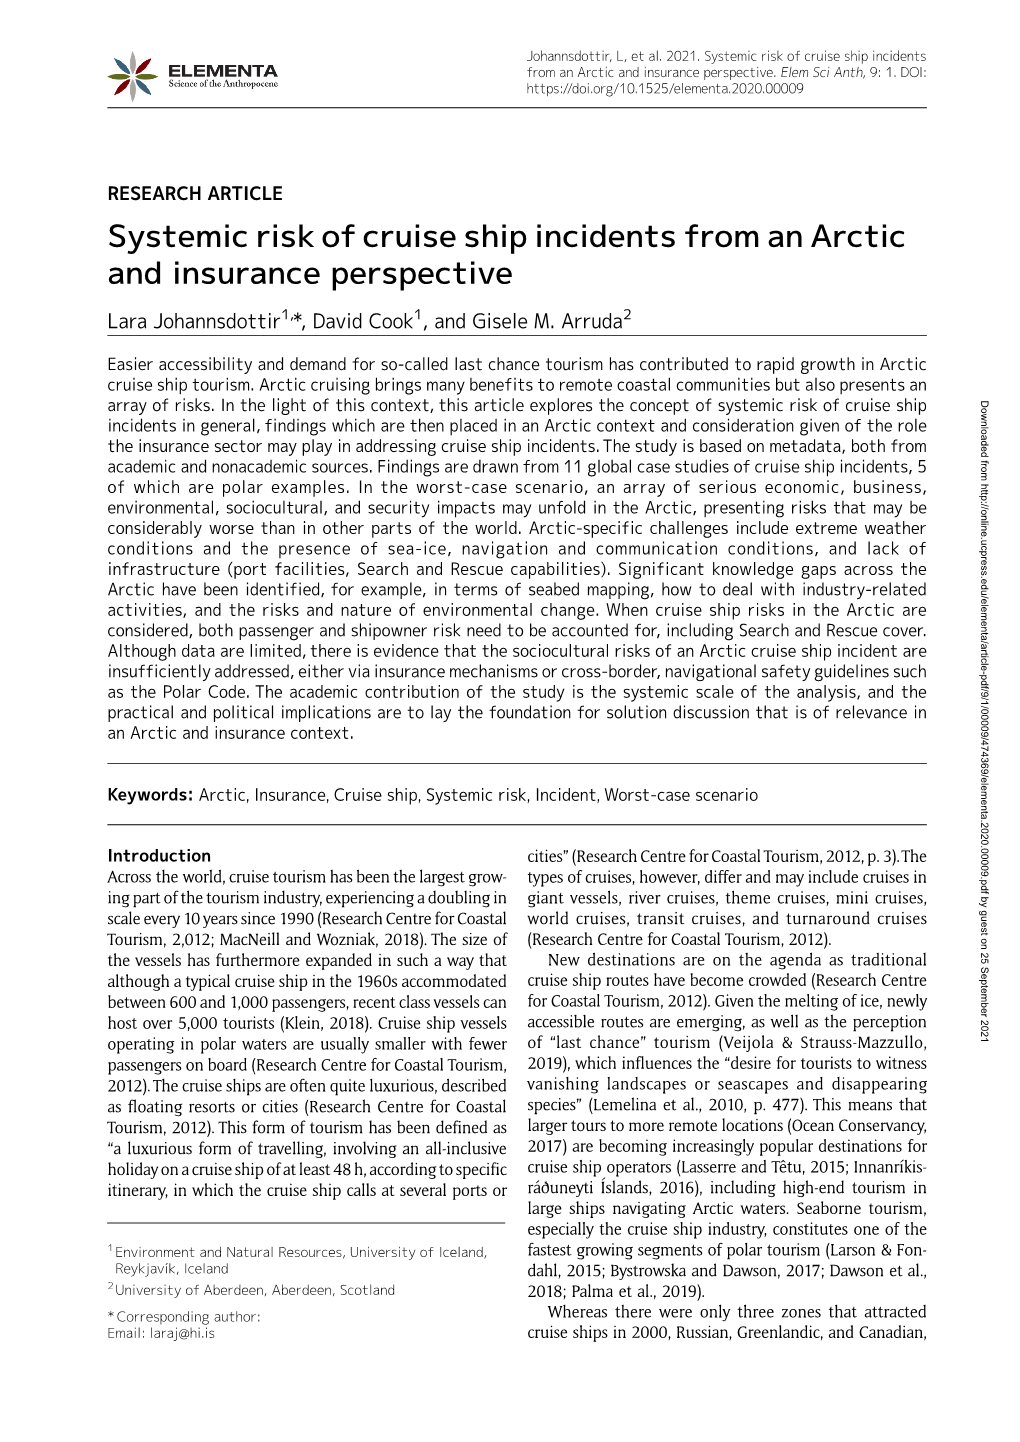 Systemic Risk of Cruise Ship Incidents from an Arctic and Insurance Perspective